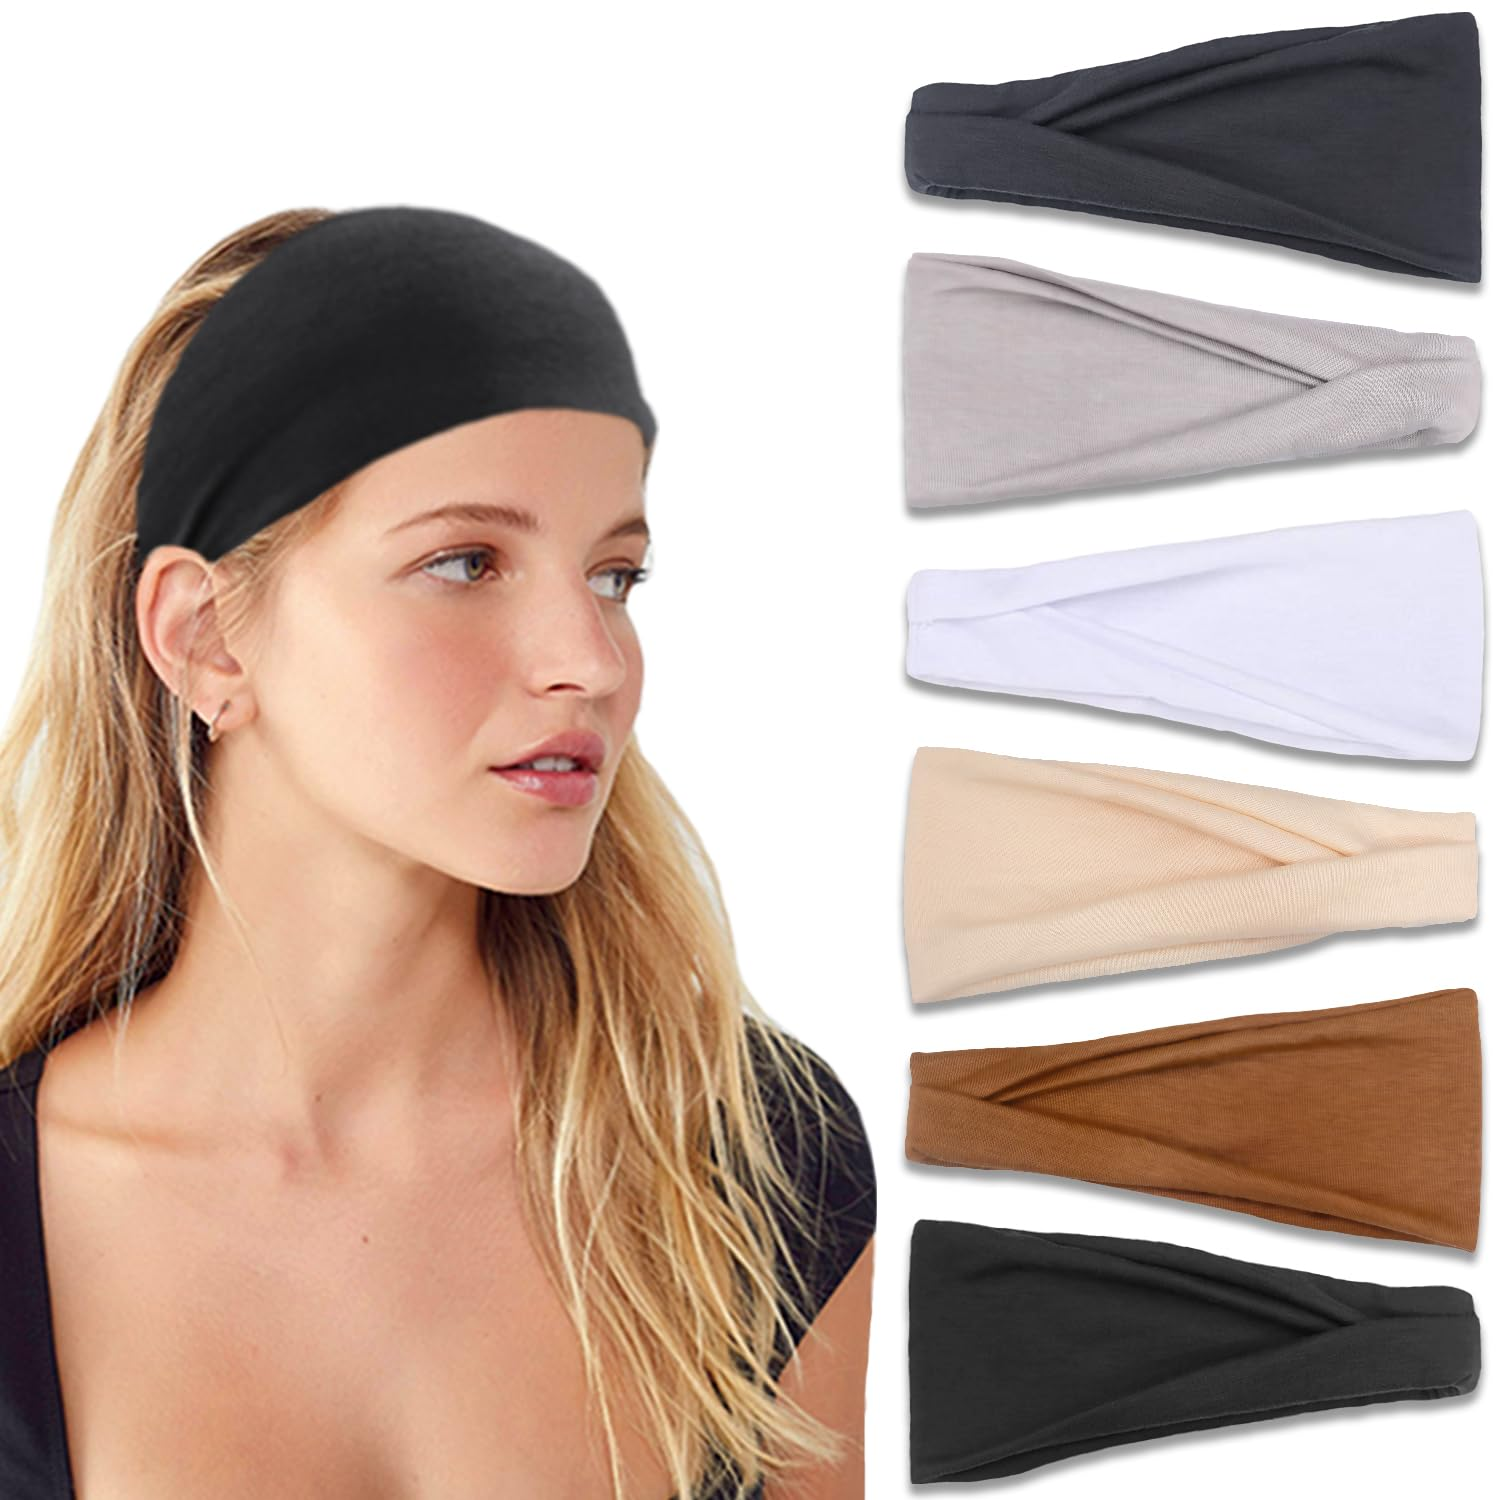 Affordable Wholesale Microfiber Hair Wrap and Magic Towel Prices in China